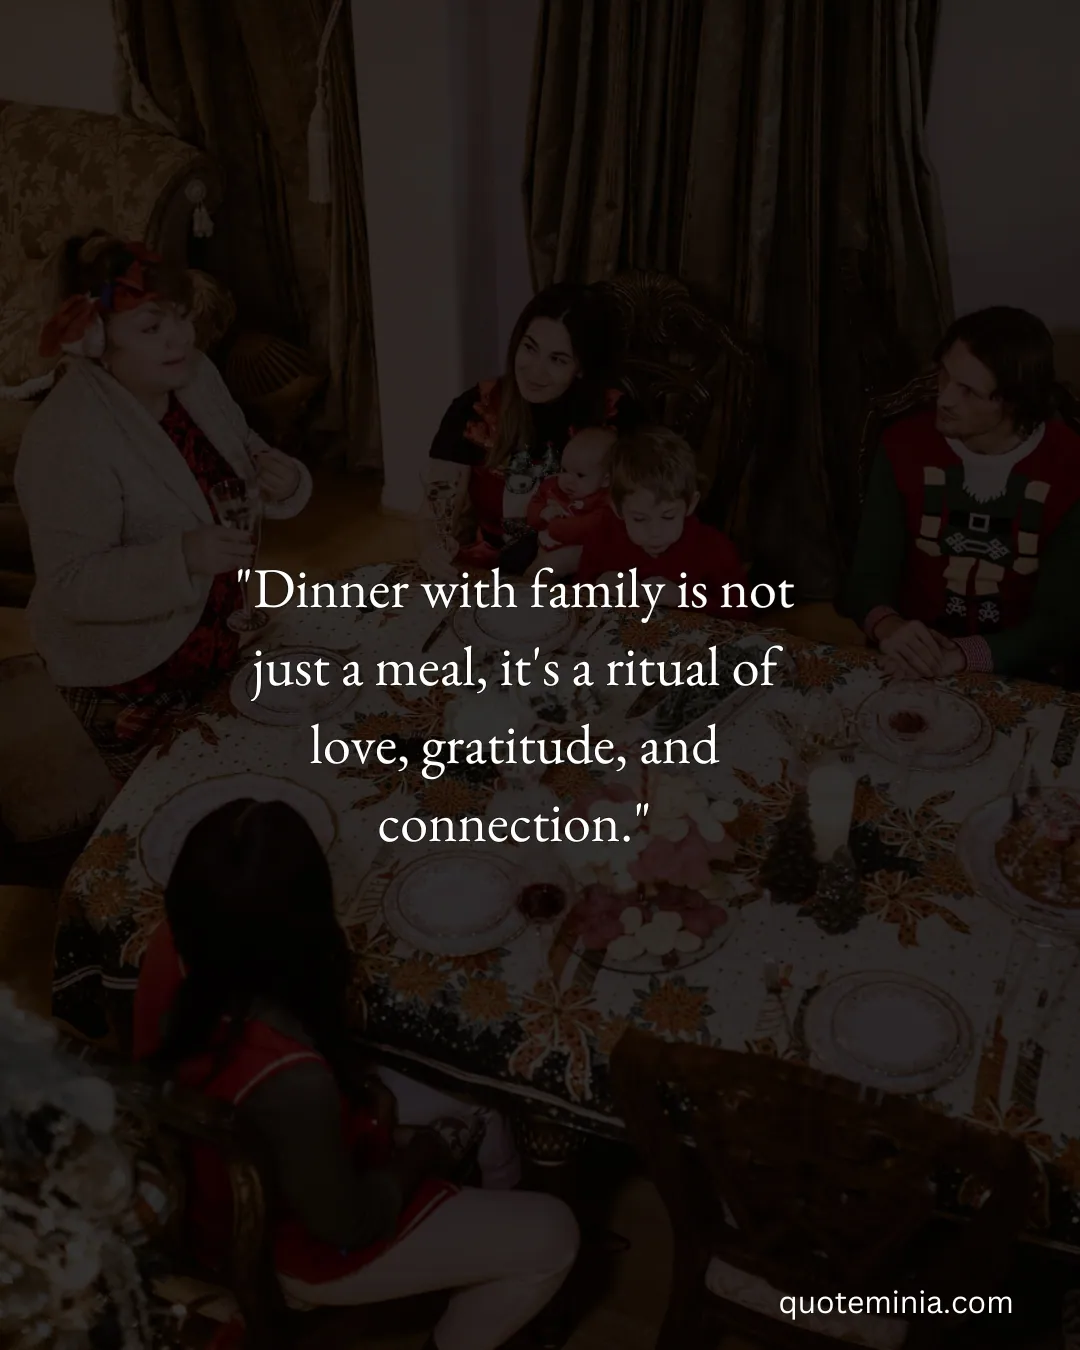 Quotes on Dinner with Family